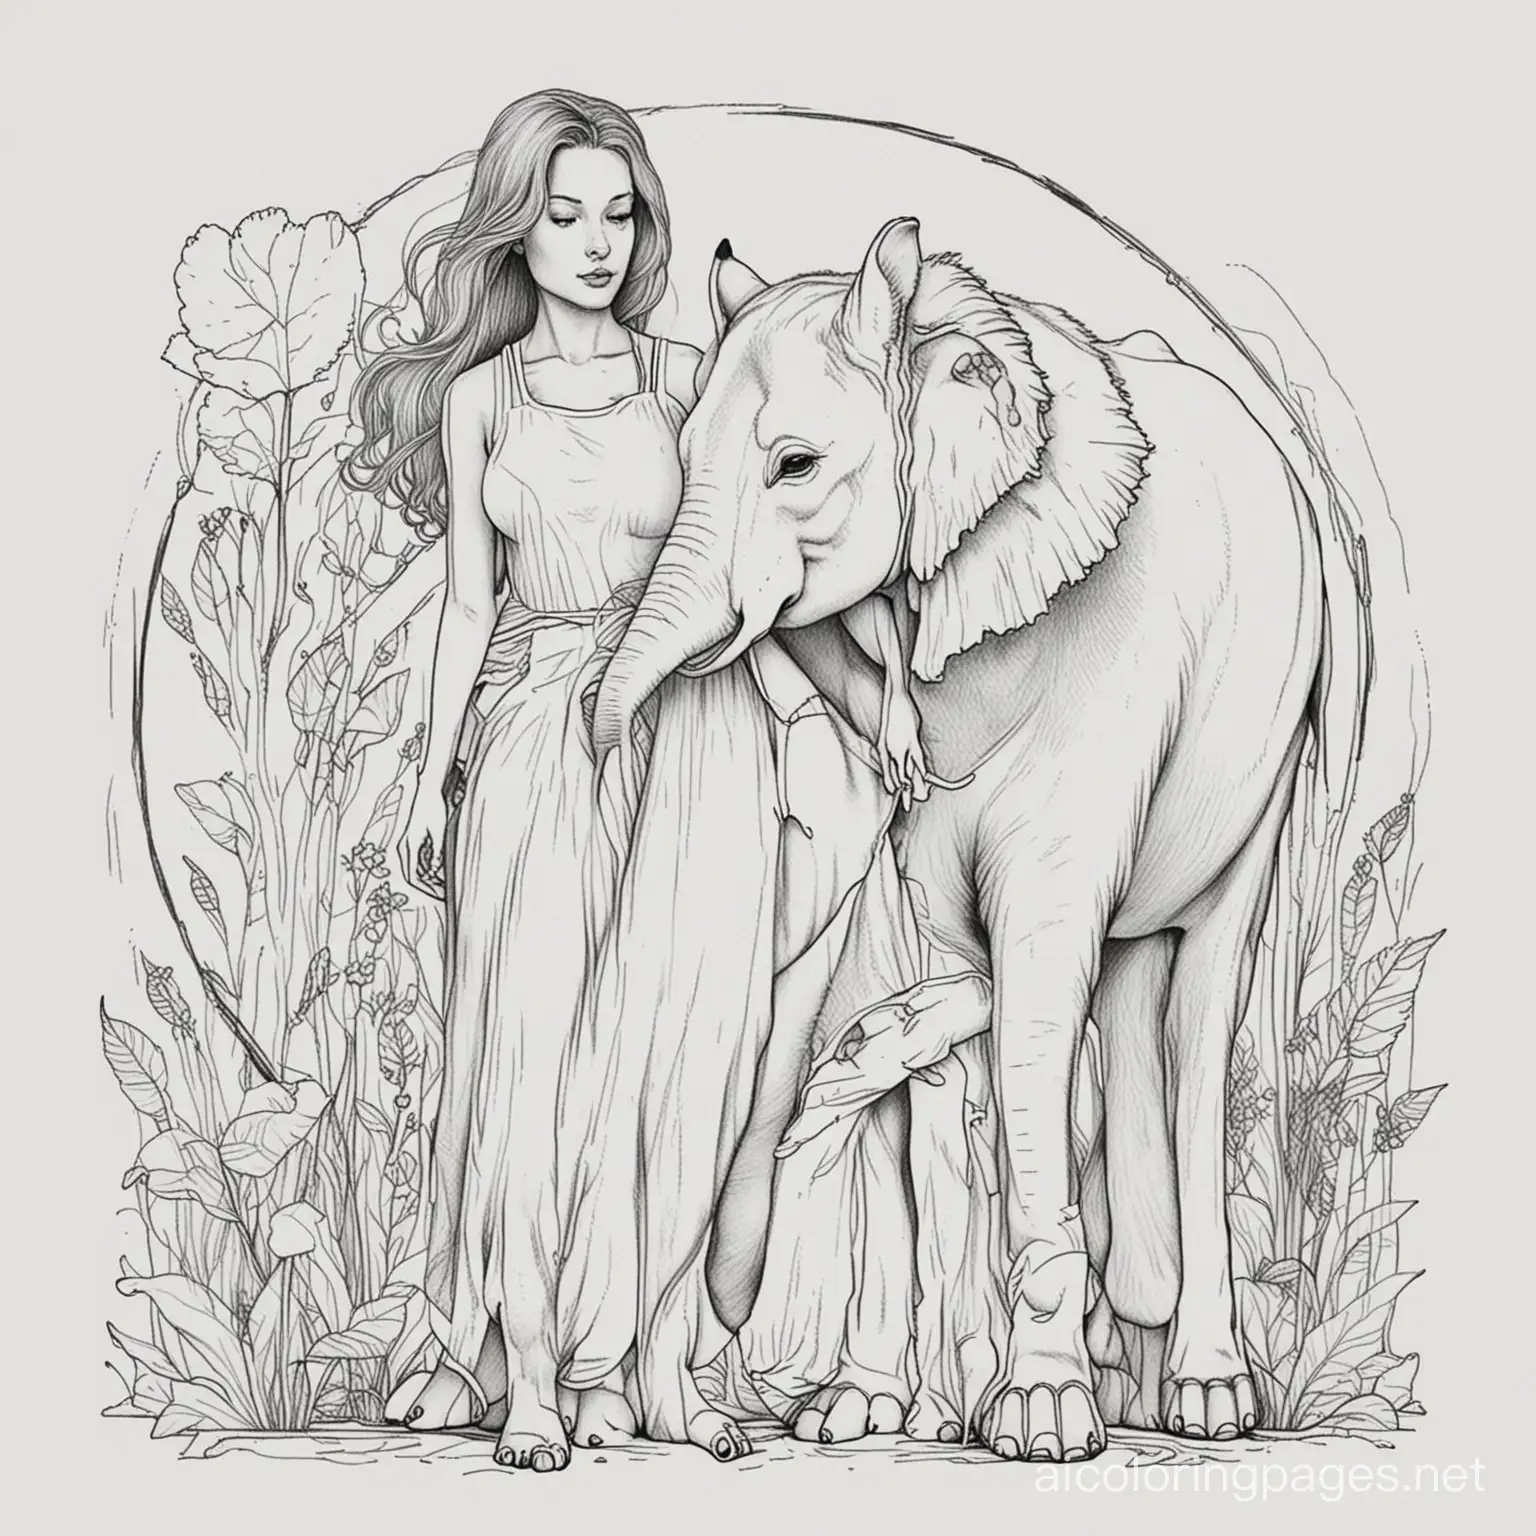 woman fused with a fox and elephant, Coloring Page, black and white, line art, white background, Simplicity, Ample White Space. The background of the coloring page is plain white to make it easy for young children to color within the lines. The outlines of all the subjects are easy to distinguish, making it simple for kids to color without too much difficulty